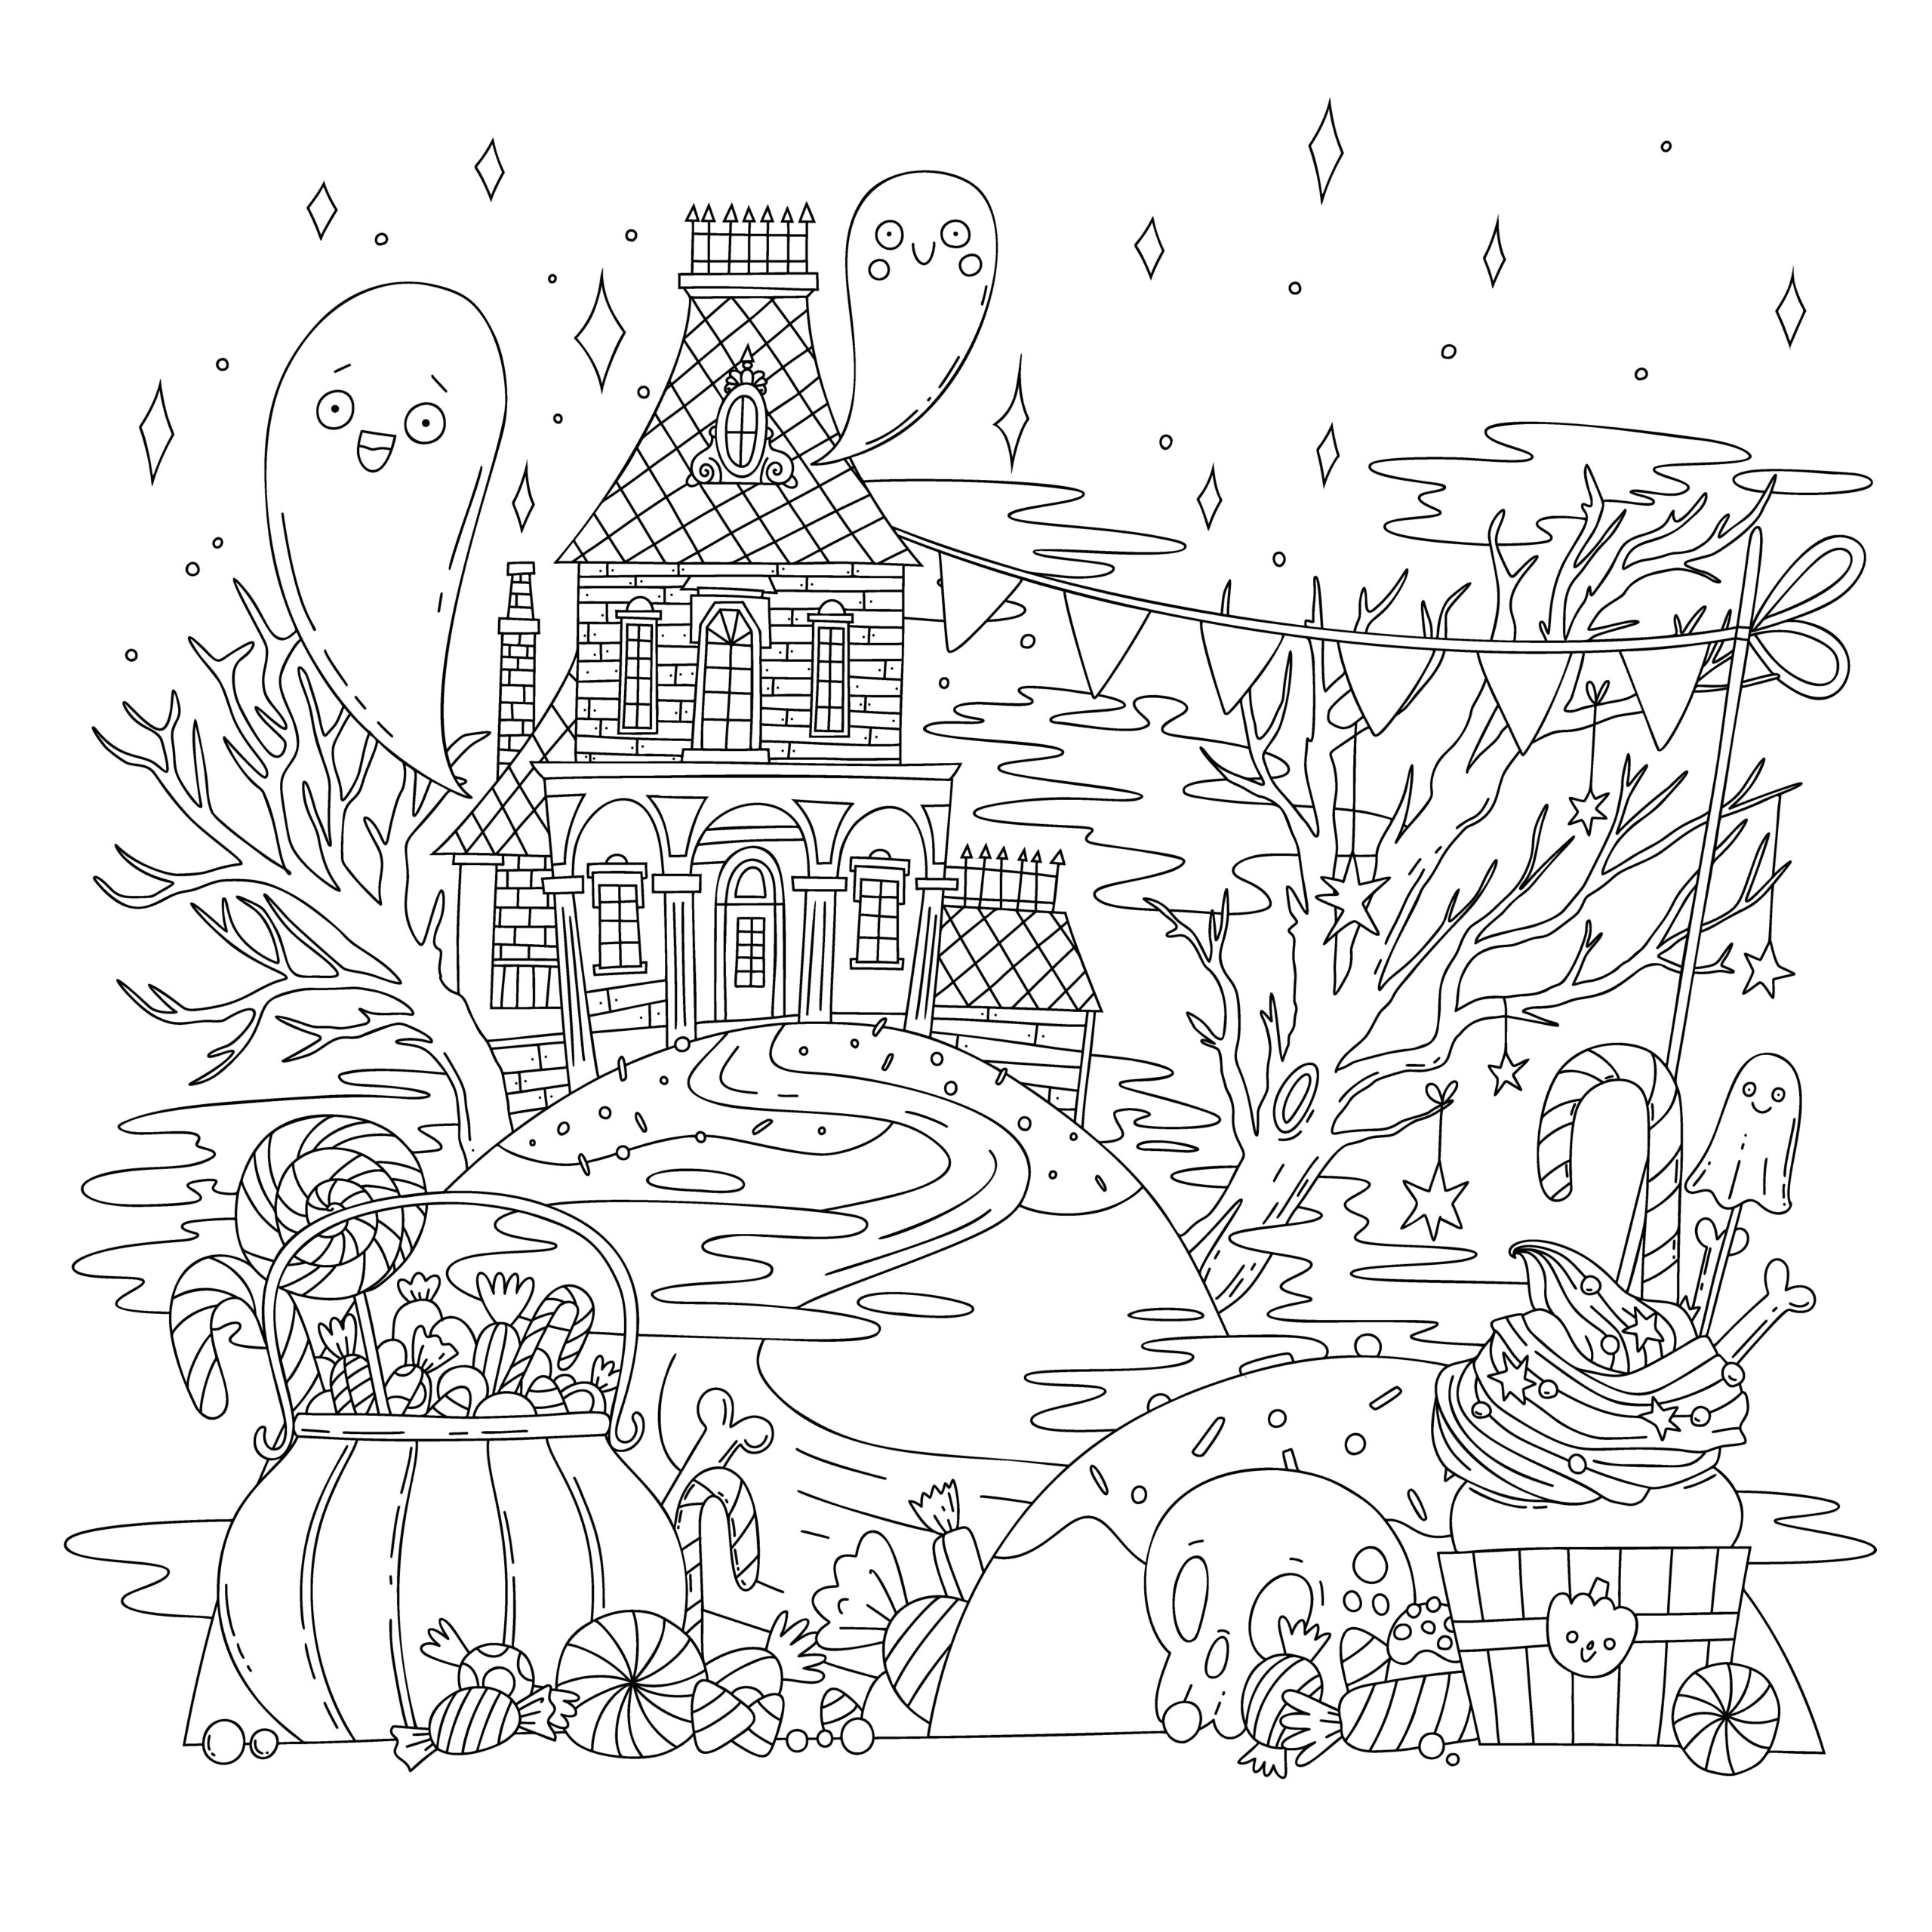 Printable witch coloring pages for kids color a scary witch